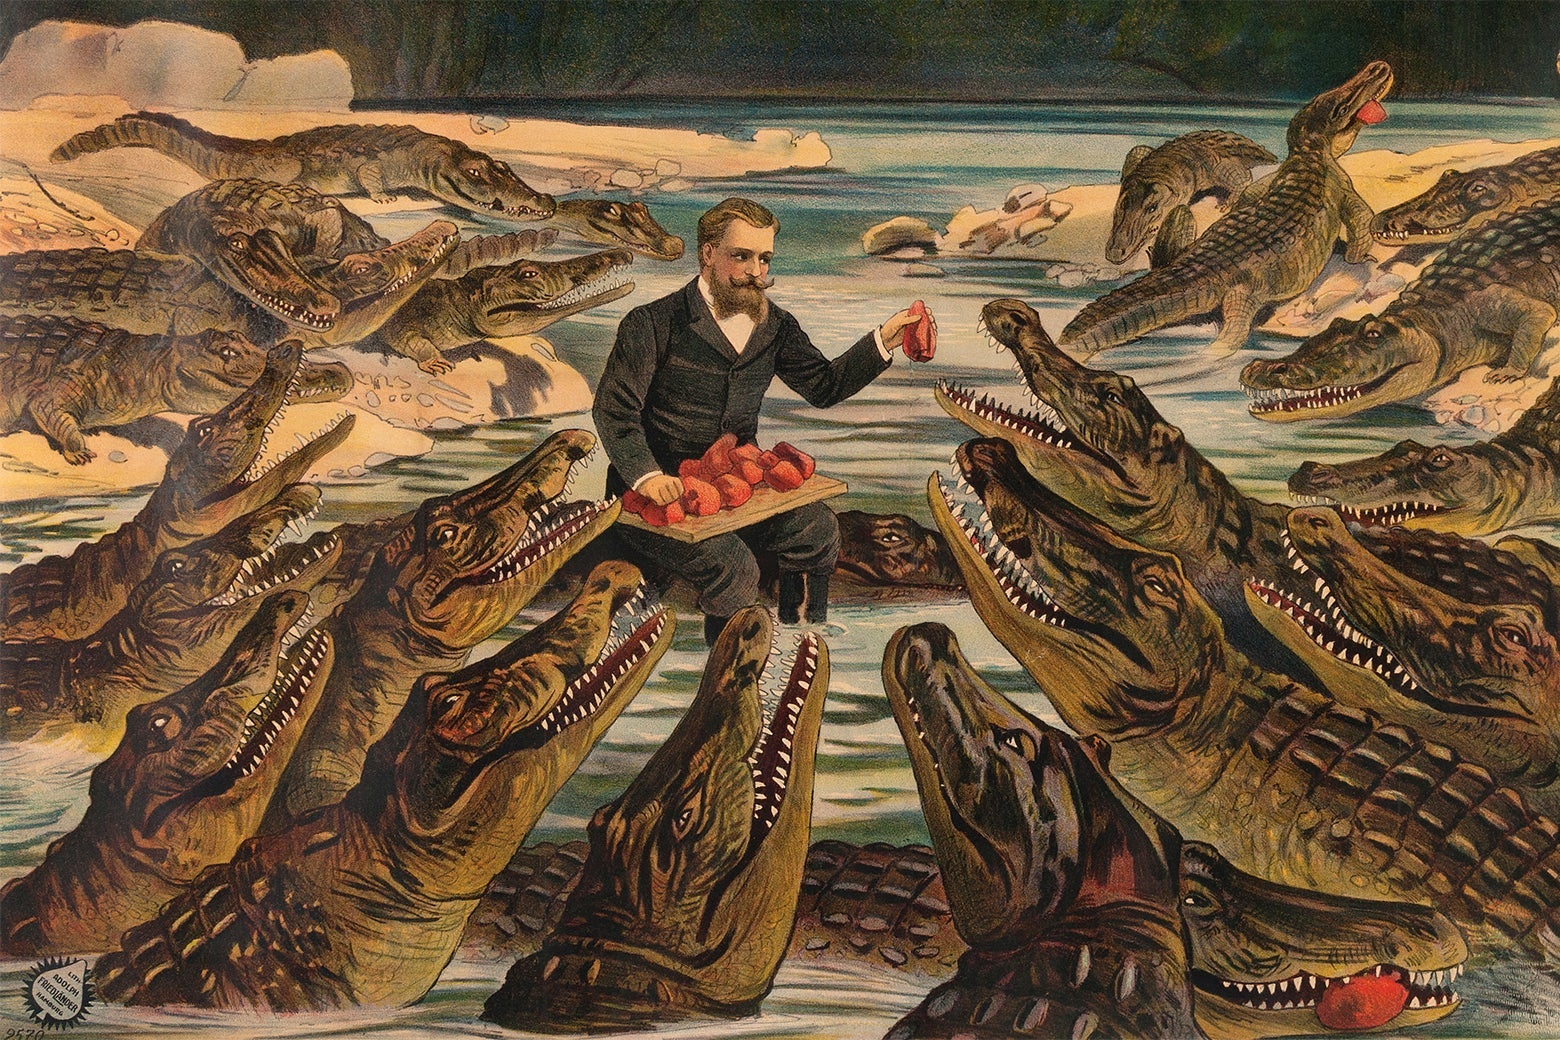 A 1902 lithograph depicting M. Pernelet sitting in water surrounded by crocodiles.